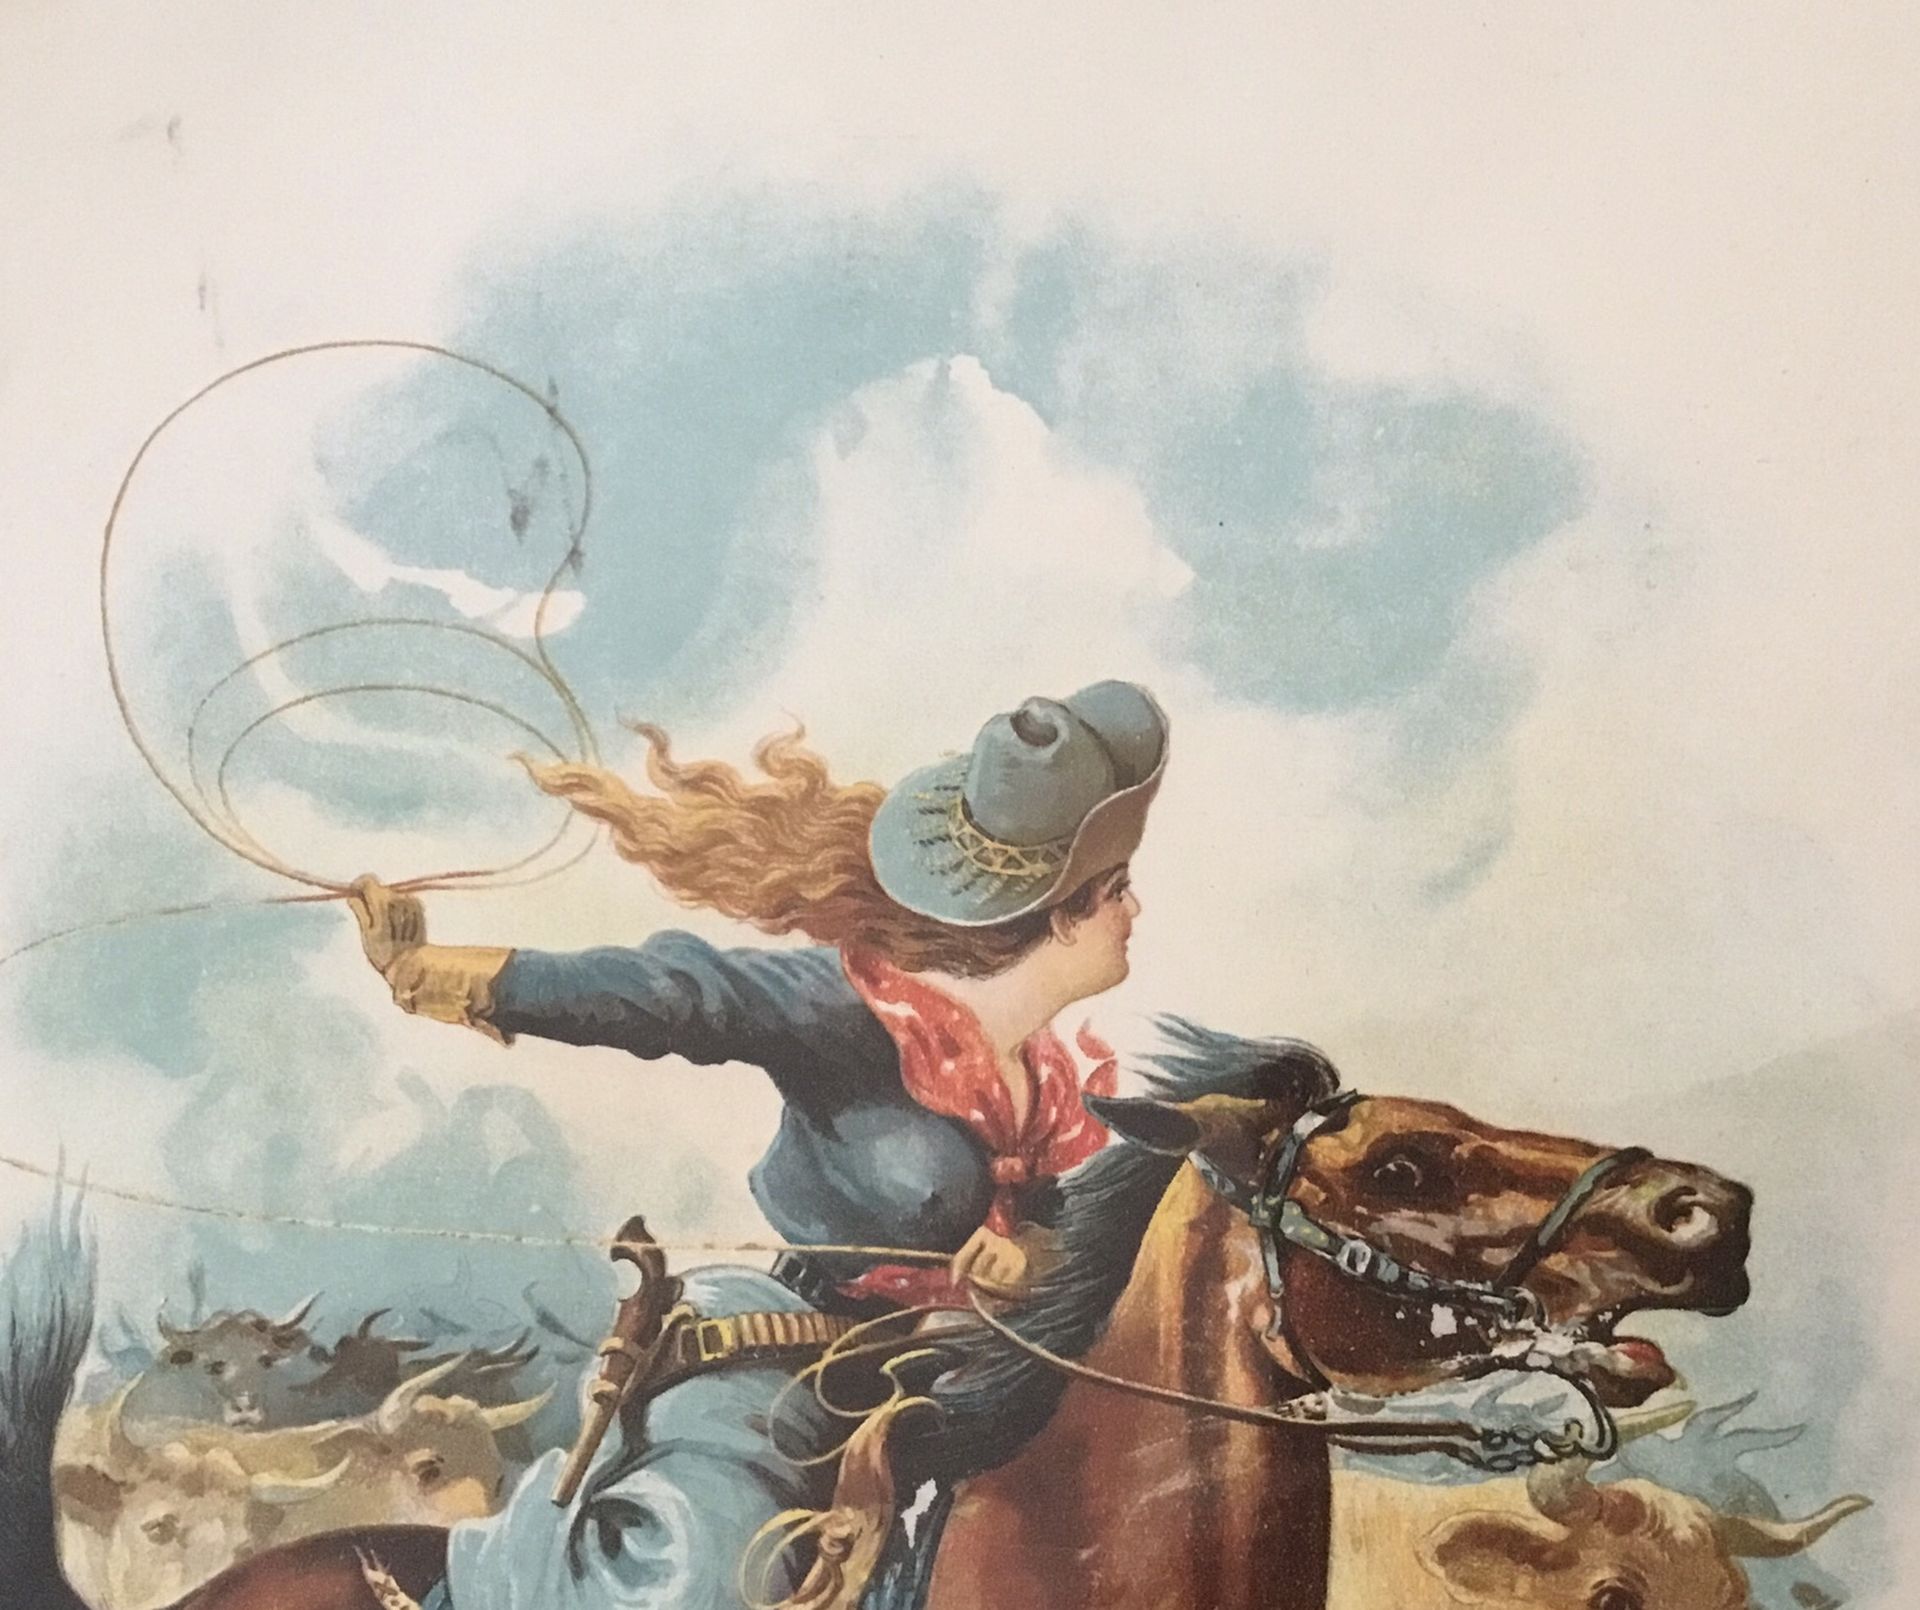 *****SMALL VINTAGE PRINT OF COWGIRL RIDING HER HORSE, GOOD SHAPE.